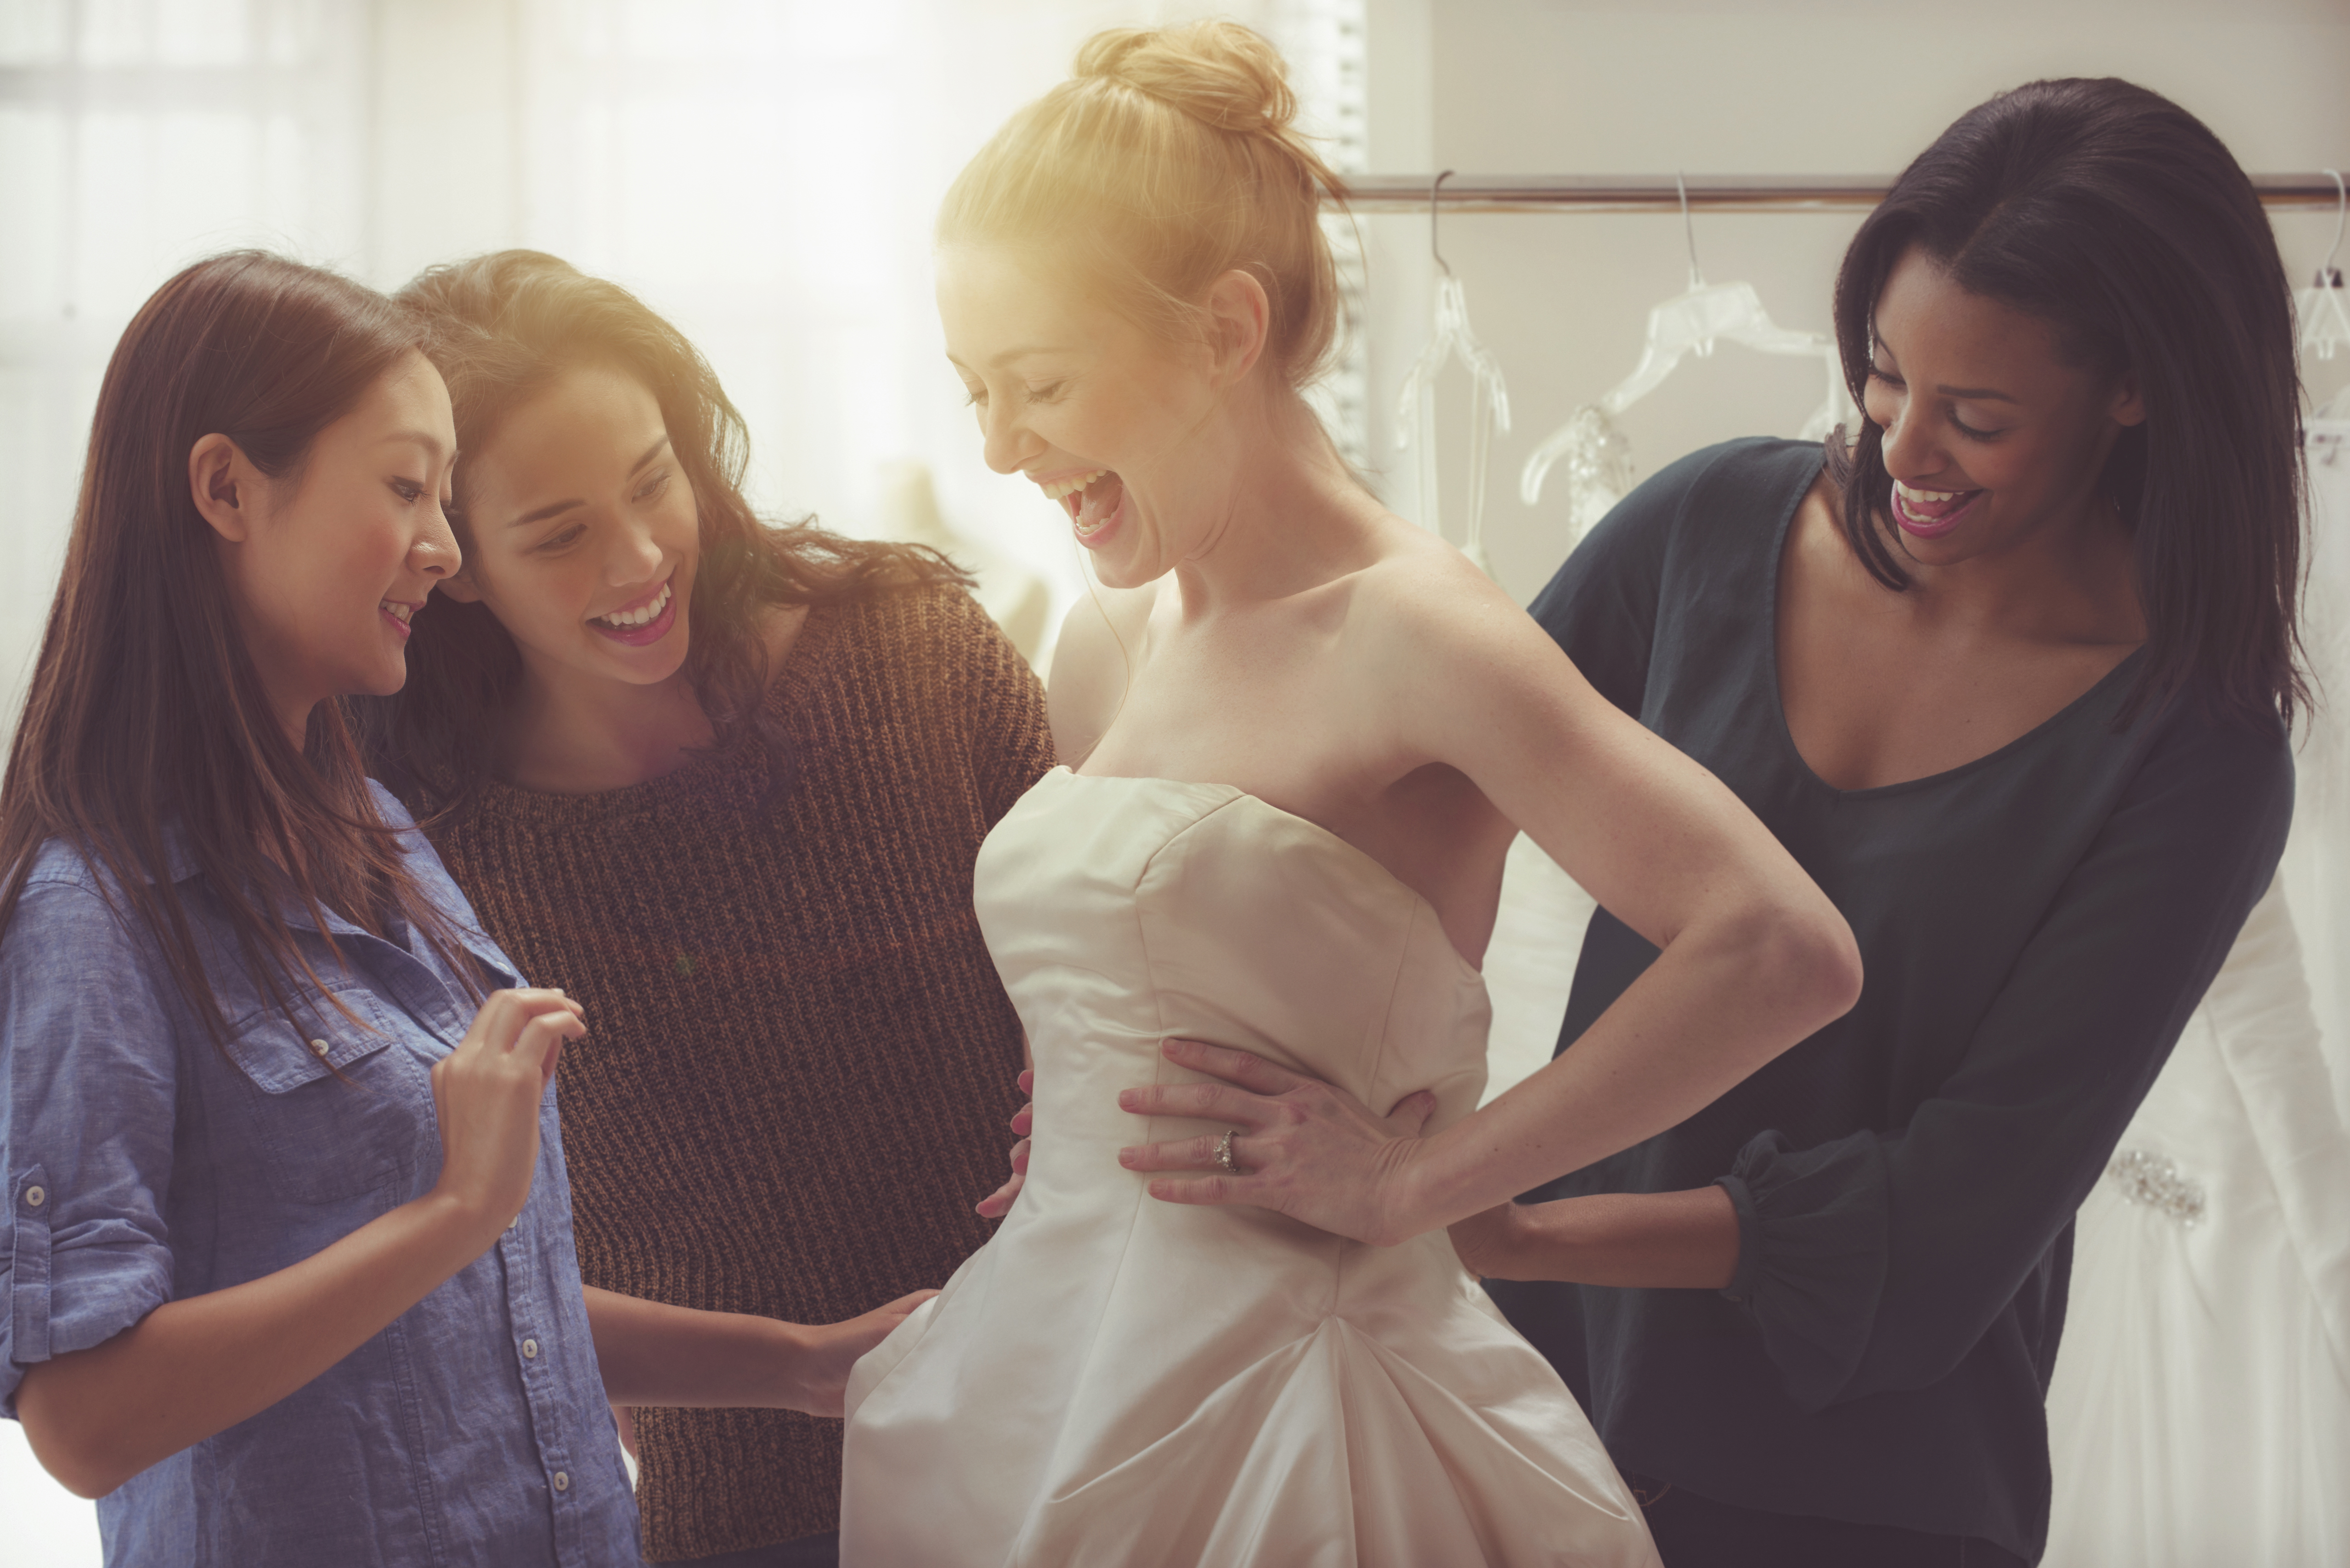 A bride and friends shopping for wedding gown. | Source: Getty Images